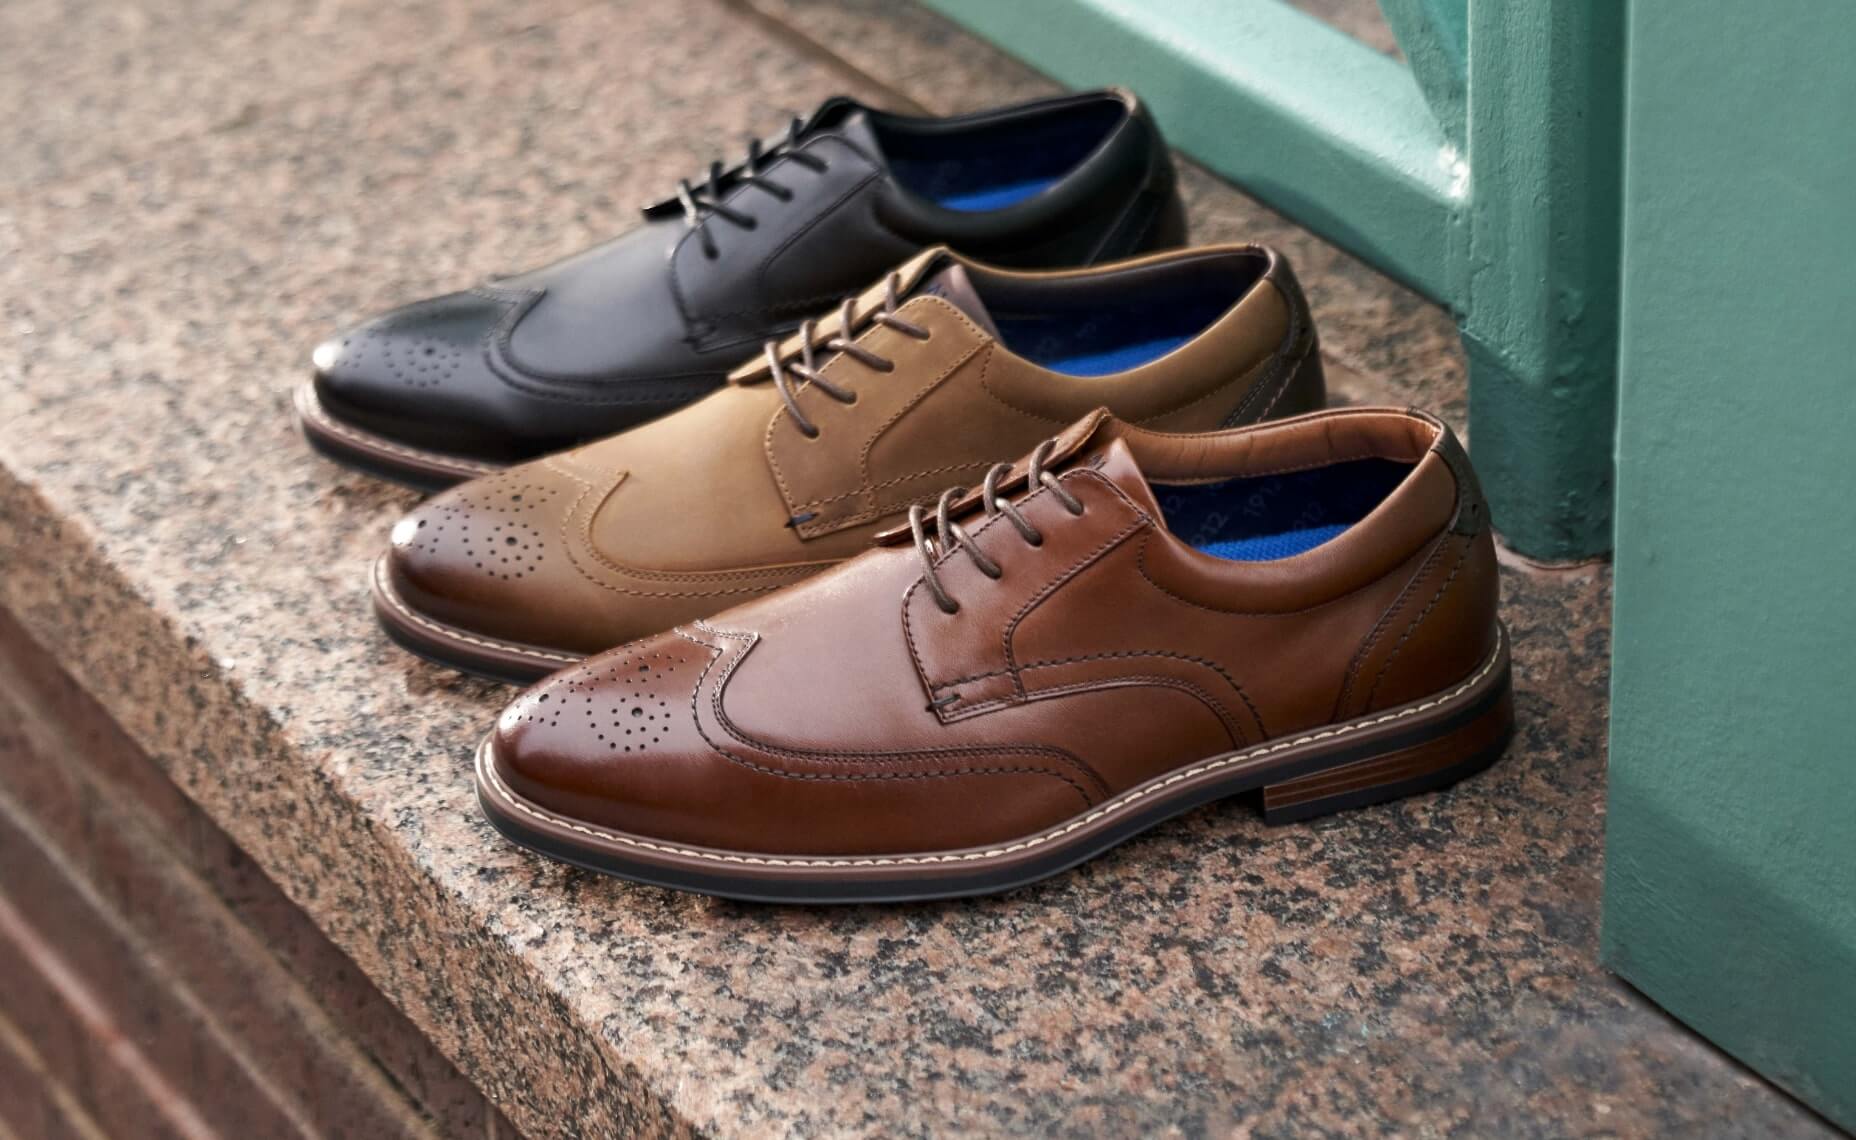 Click to shop Nunn Bush dress shoes. Image features the Centro Wingtip in all 3 colorways.